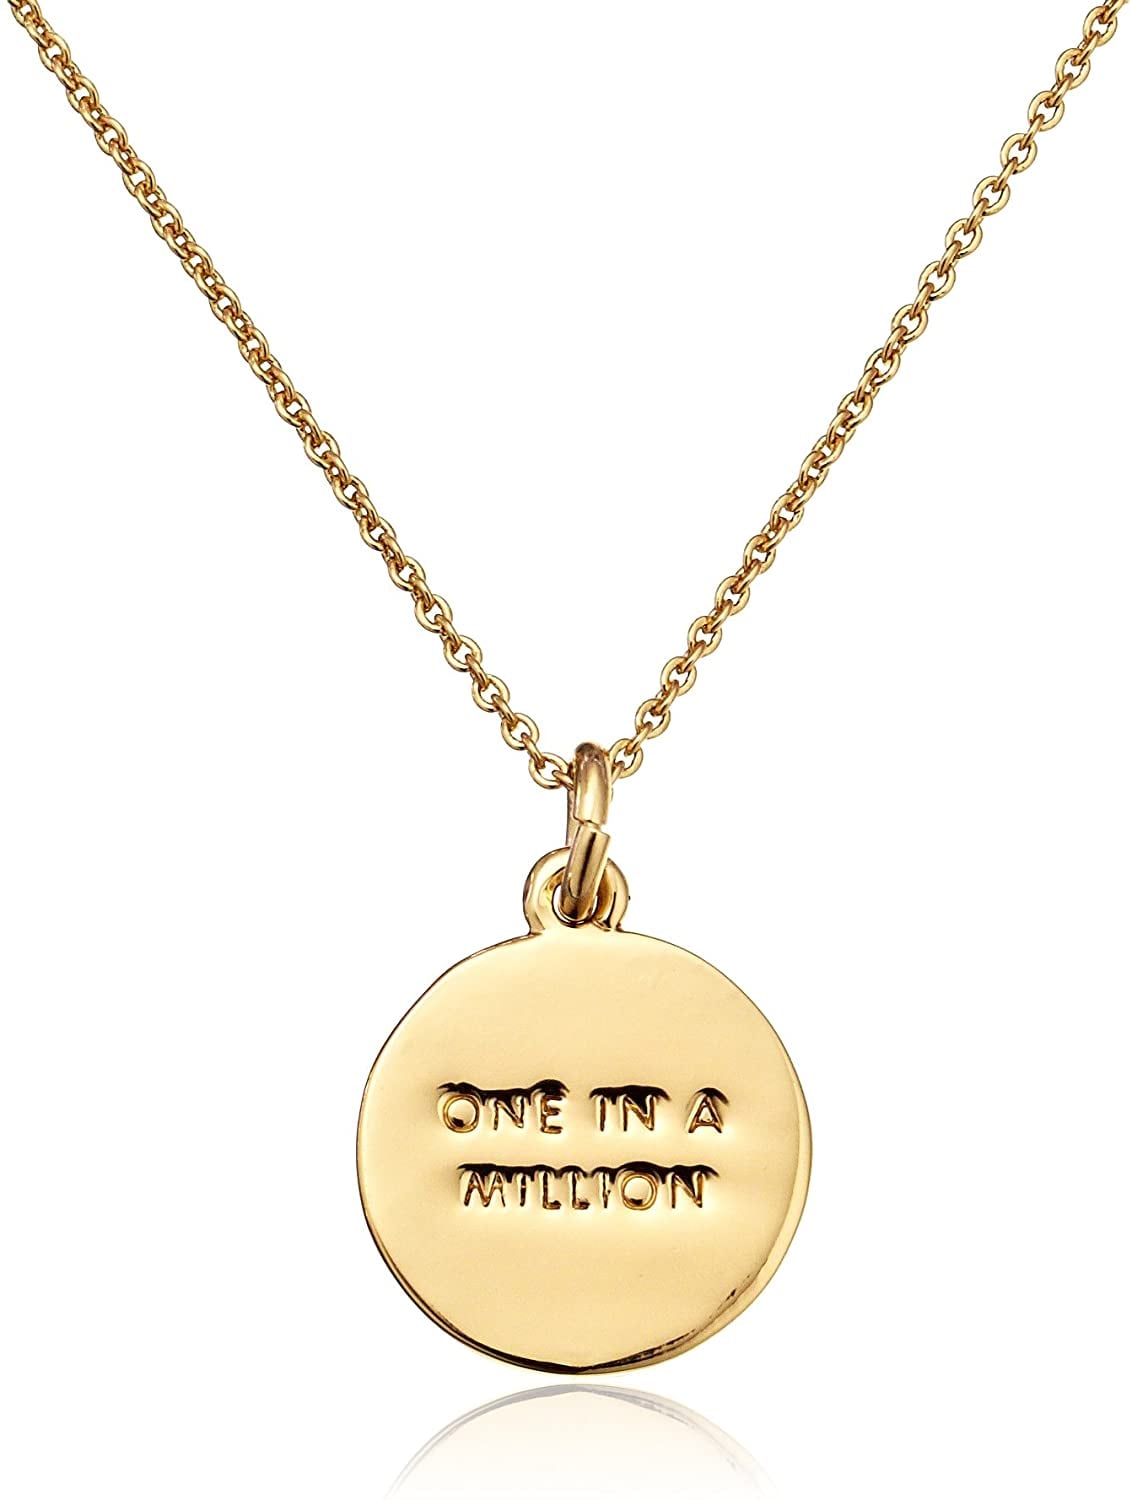 Kate Spade New York Pendant Necklace | Kate Spade's Alphabet Necklaces Are  40% Off For Black Friday | POPSUGAR Fashion Photo 3